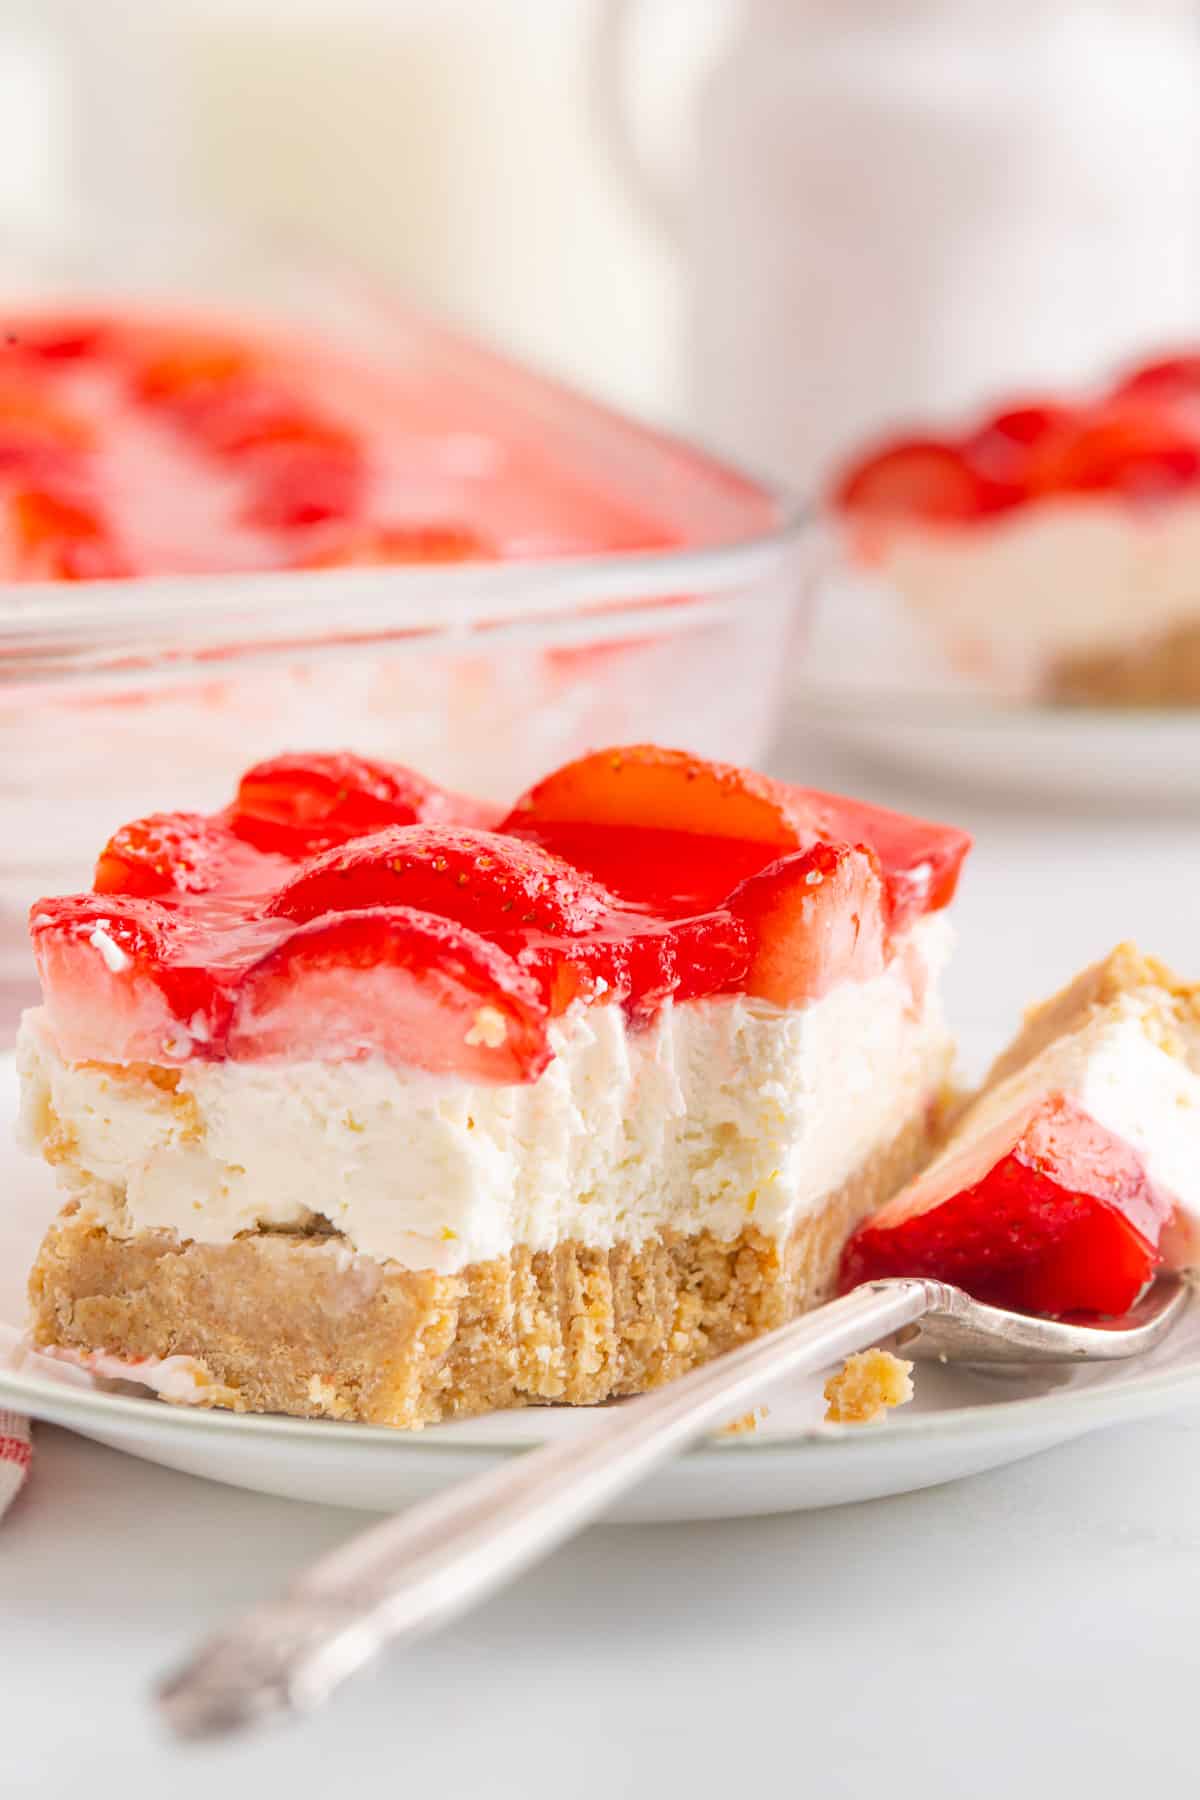 A slice of Strawberry Delight with a bite taken out on a fork on a small plate with a second serving and the baking dish in the background.